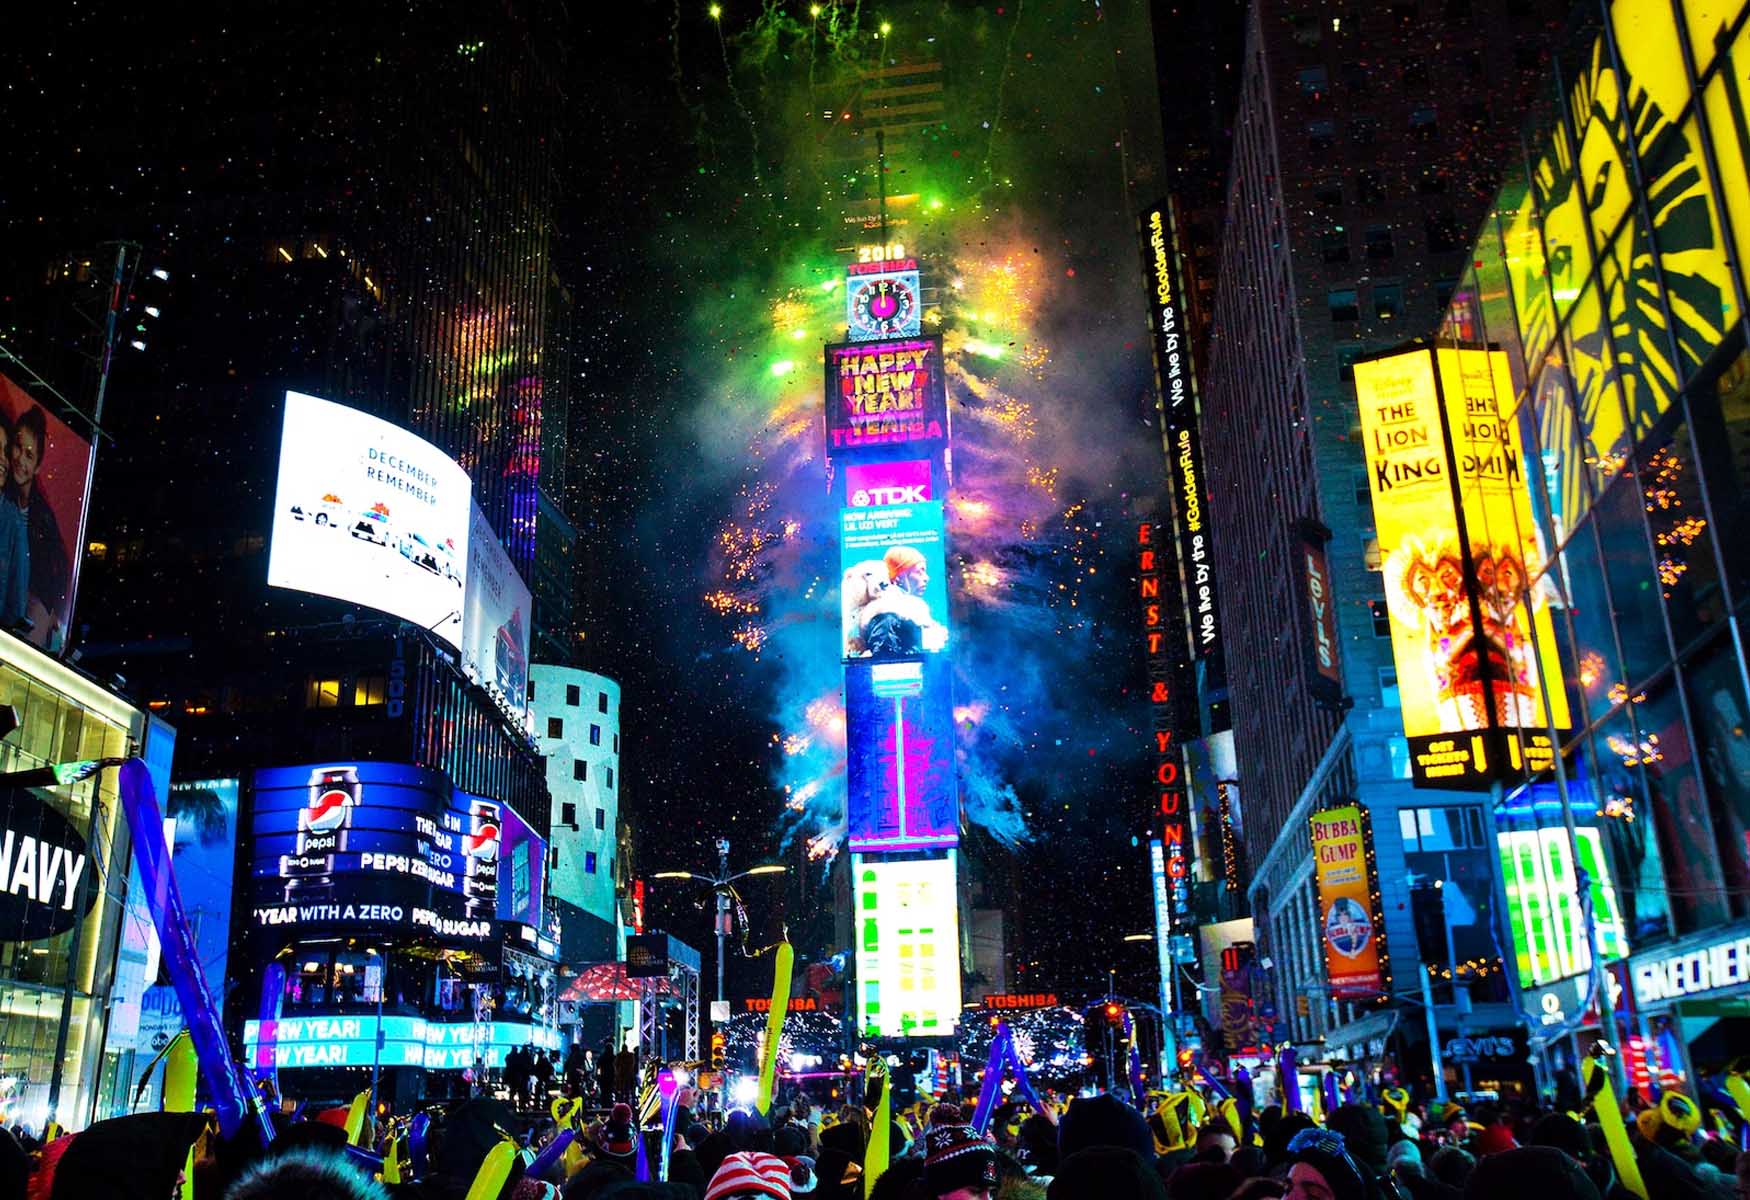 The BEST 20 Places To Spend A Happy New Year